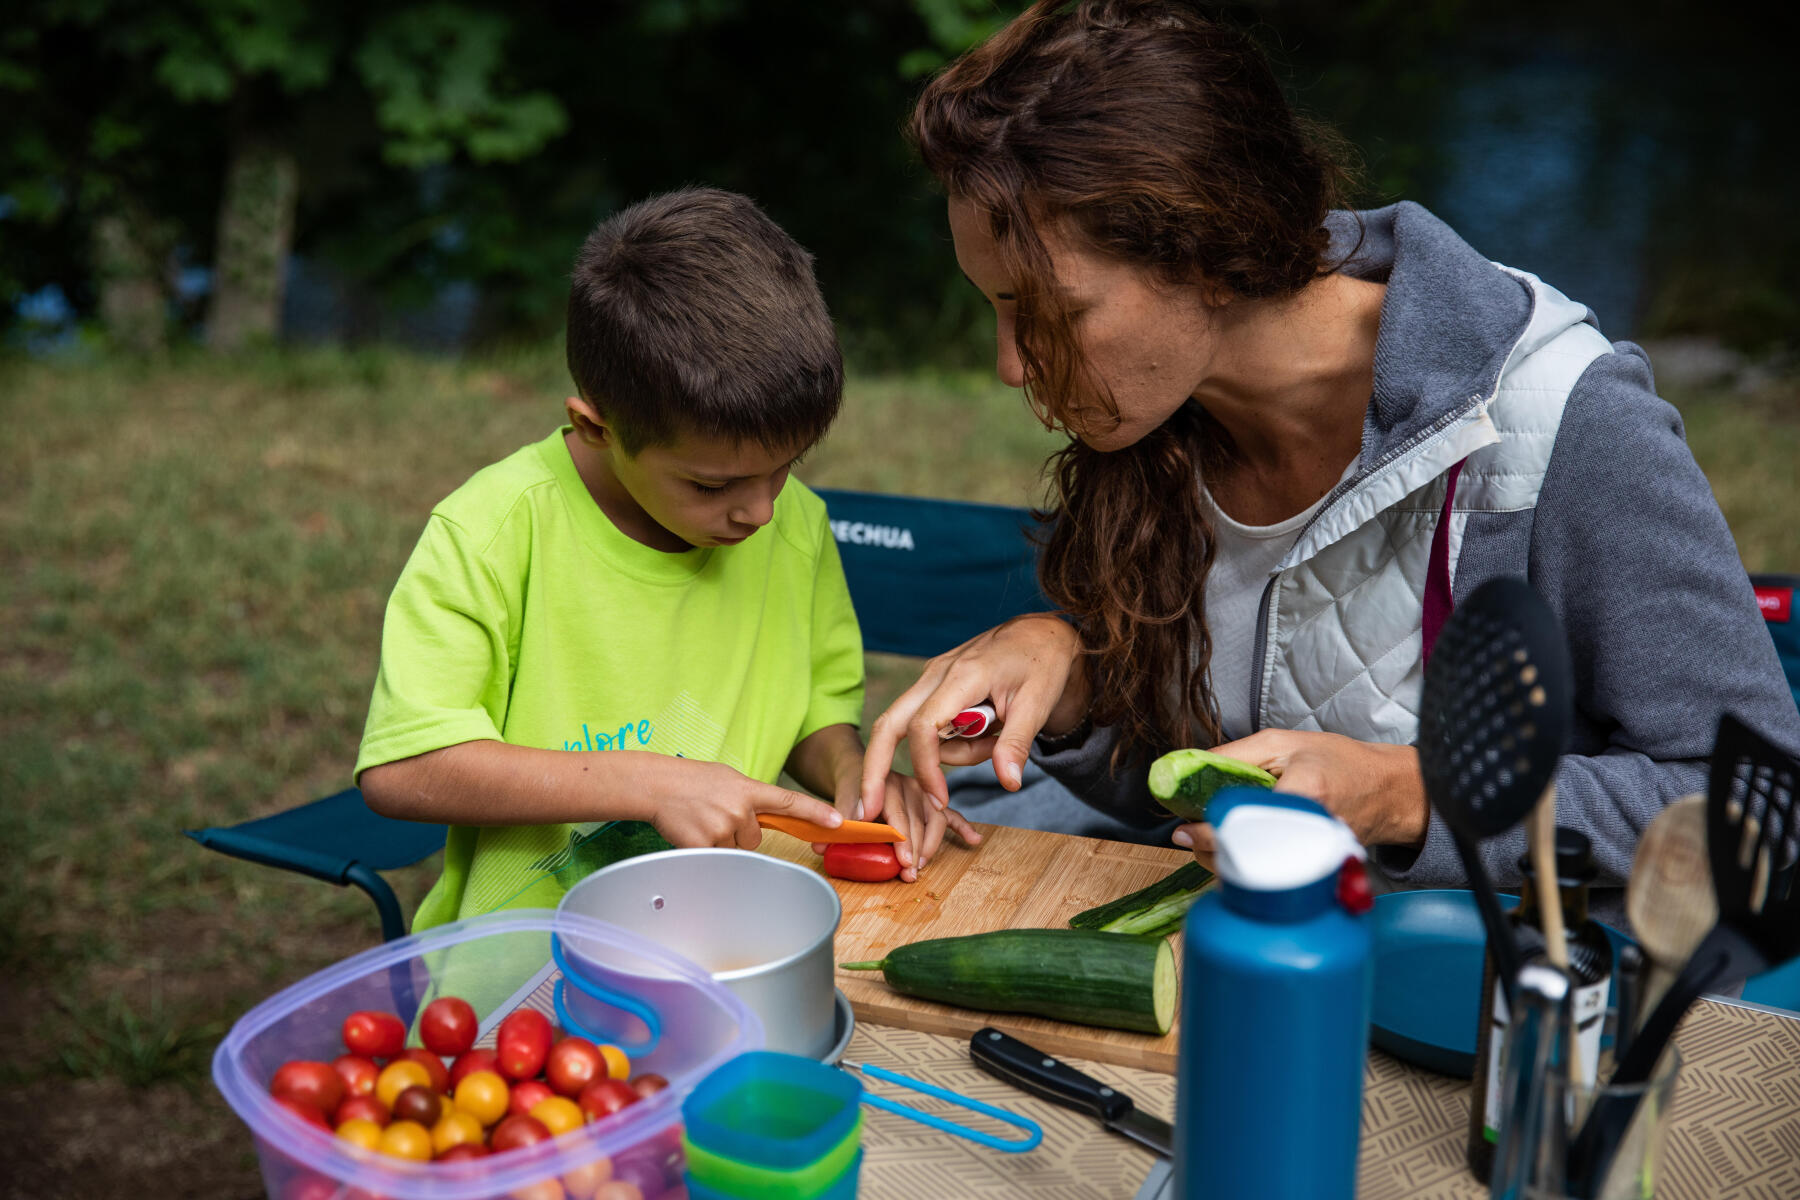 6 easy outdoor recipes to make with your children